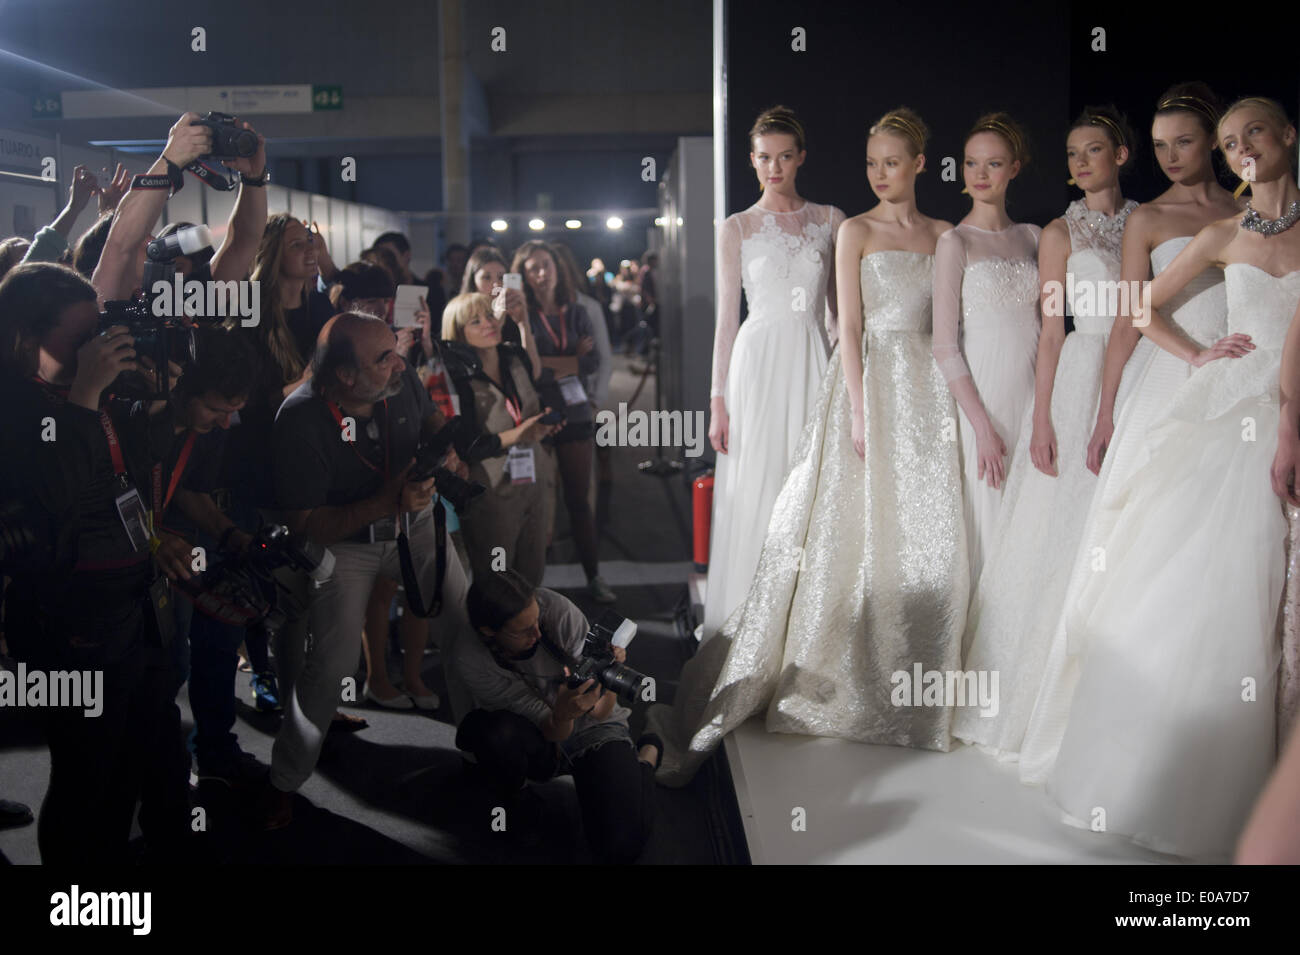 Barcelona, Spain. 7th May, 2014.  A group of photographers shooting a group of models dressed as brides. Barcelona Bridal Week is a fashion industry event that includes Gaudi Novias (brides) Catwalk. Credit:  Jordi Boixareu/ZUMA Wire/ZUMAPRESS.com/Alamy Live News Stock Photo